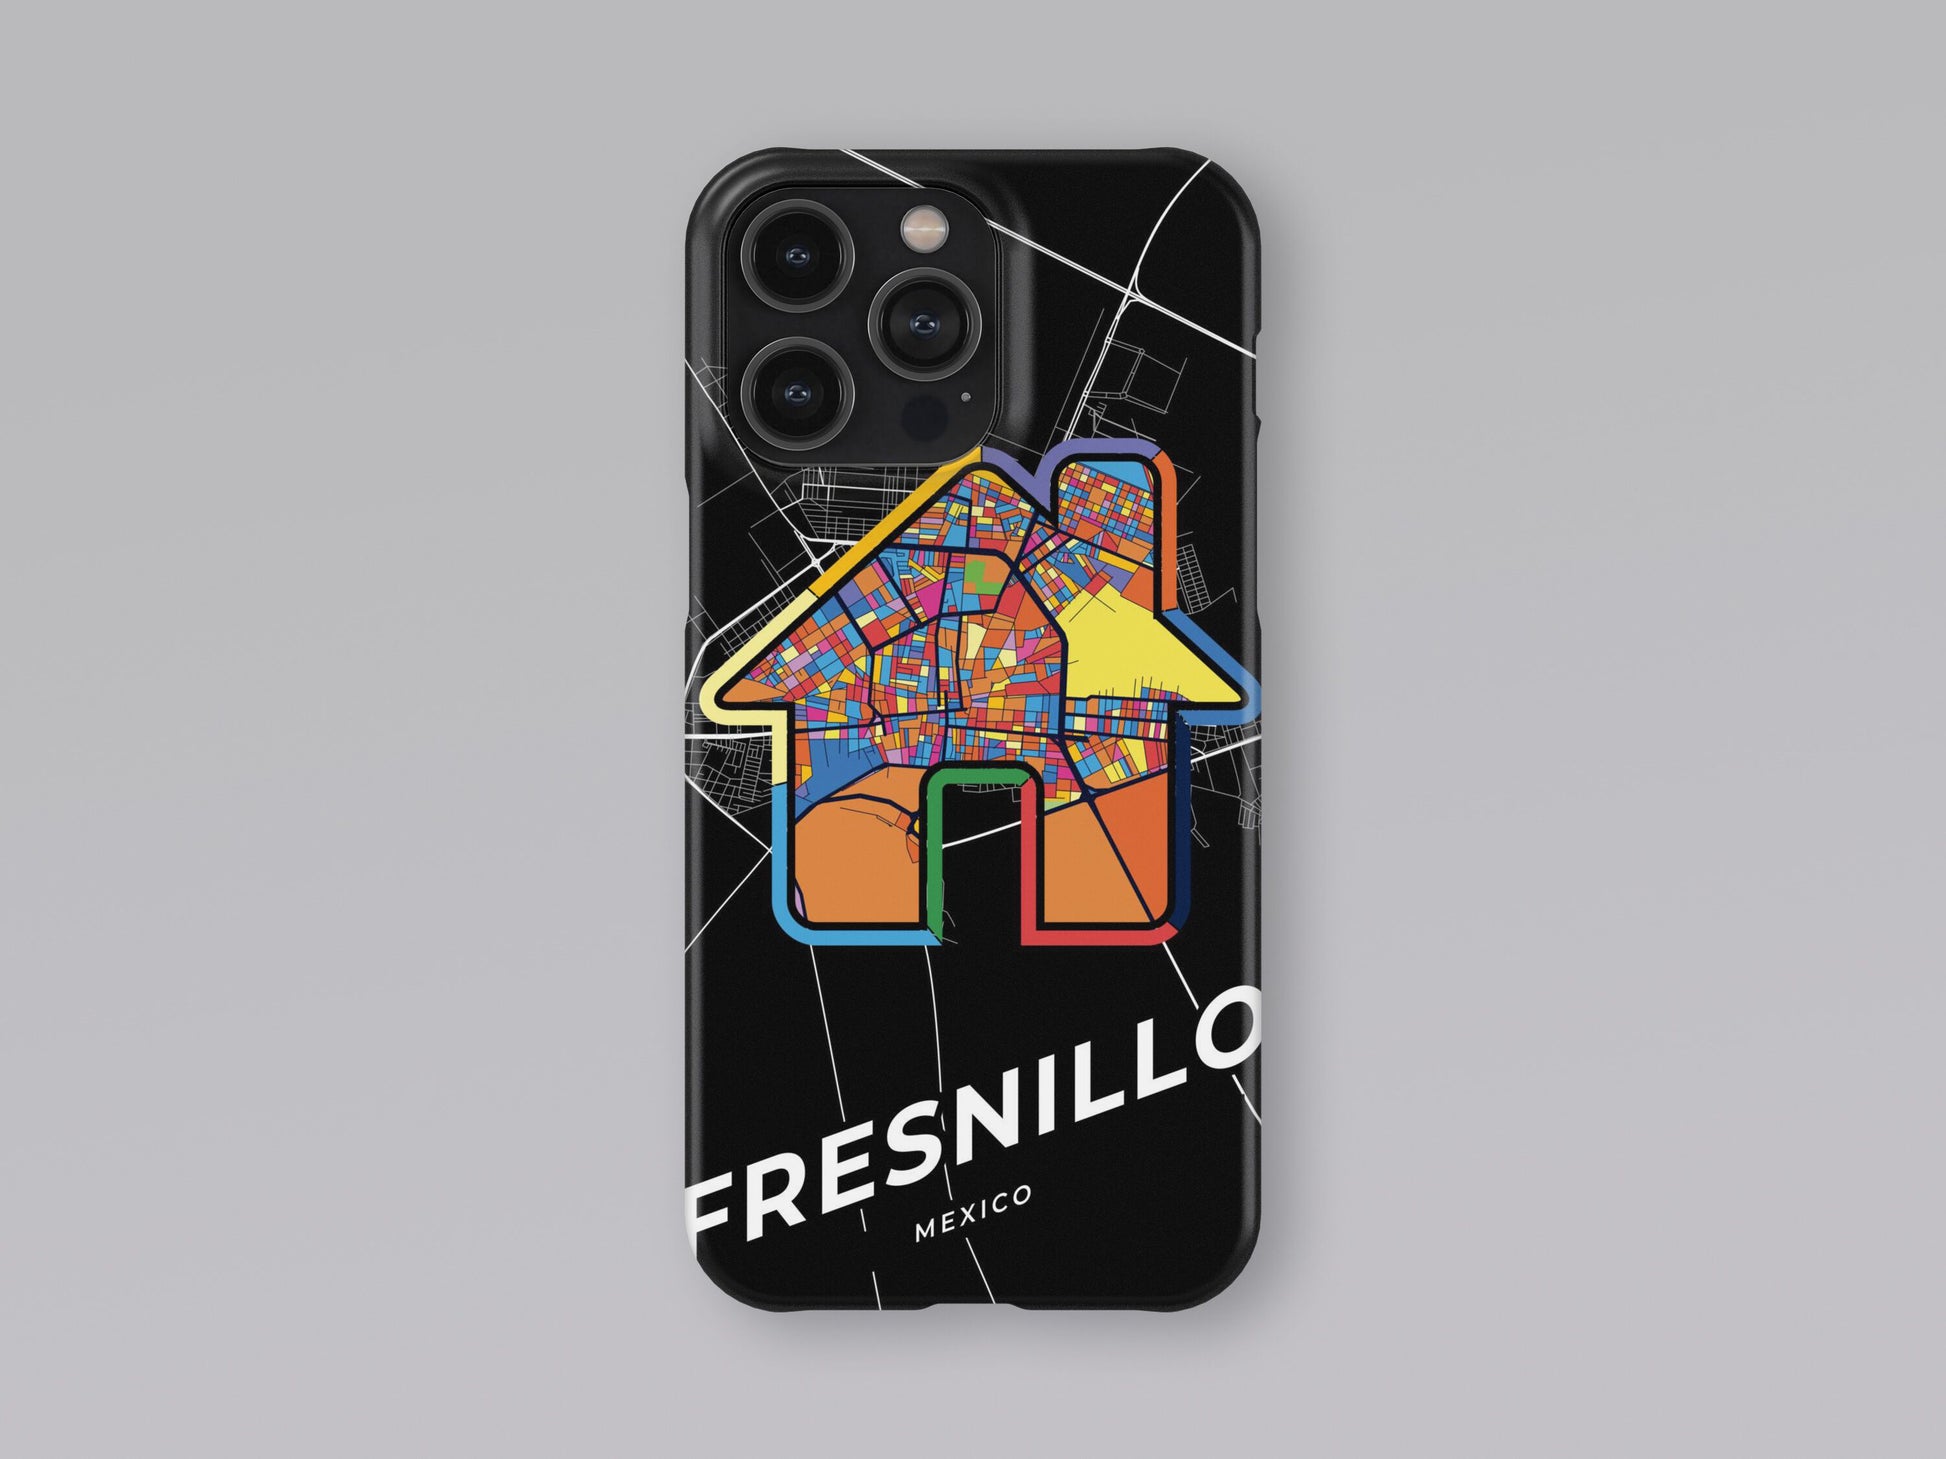 Fresnillo Mexico slim phone case with colorful icon. Birthday, wedding or housewarming gift. Couple match cases. 3